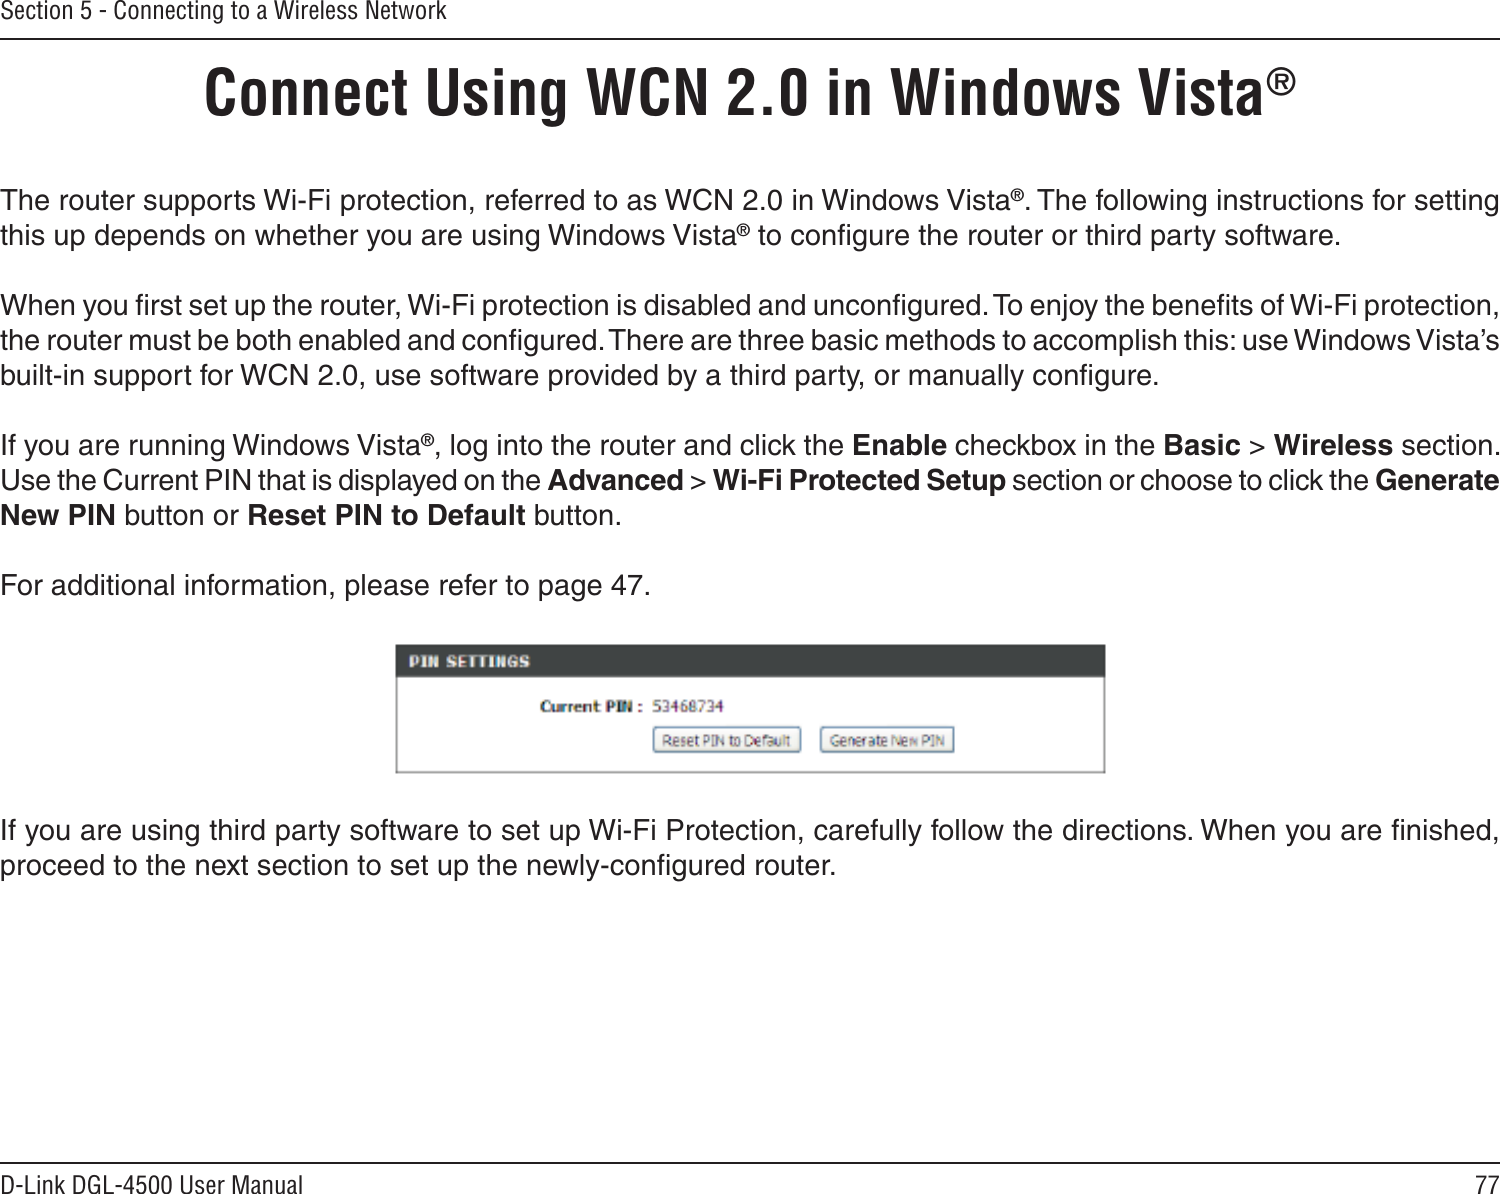 77D-Link DGL-4500 User ManualSection 5 - Connecting to a Wireless NetworkConnect Using WCN 2.0 in Windows Vista® The router supports Wi-Fi protection, referred to as WCN 2.0 in Windows Vista®. The following instructions for setting this up depends on whether you are using Windows Vista® to conﬁgure the router or third party software.        When you ﬁrst set up the router, Wi-Fi protection is disabled and unconﬁgured. To enjoy the beneﬁts of Wi-Fi protection, the router must be both enabled and conﬁgured. There are three basic methods to accomplish this: use Windows Vista’s built-in support for WCN 2.0, use software provided by a third party, or manually conﬁgure. If you are running Windows Vista®, log into the router and click the Enable checkbox in the Basic &gt; Wireless section. Use the Current PIN that is displayed on the Advanced &gt; Wi-Fi Protected Setup section or choose to click the Generate New PIN button or Reset PIN to Default button. For additional information, please refer to page 47.If you are using third party software to set up Wi-Fi Protection, carefully follow the directions. When you are ﬁnished, proceed to the next section to set up the newly-conﬁgured router. 